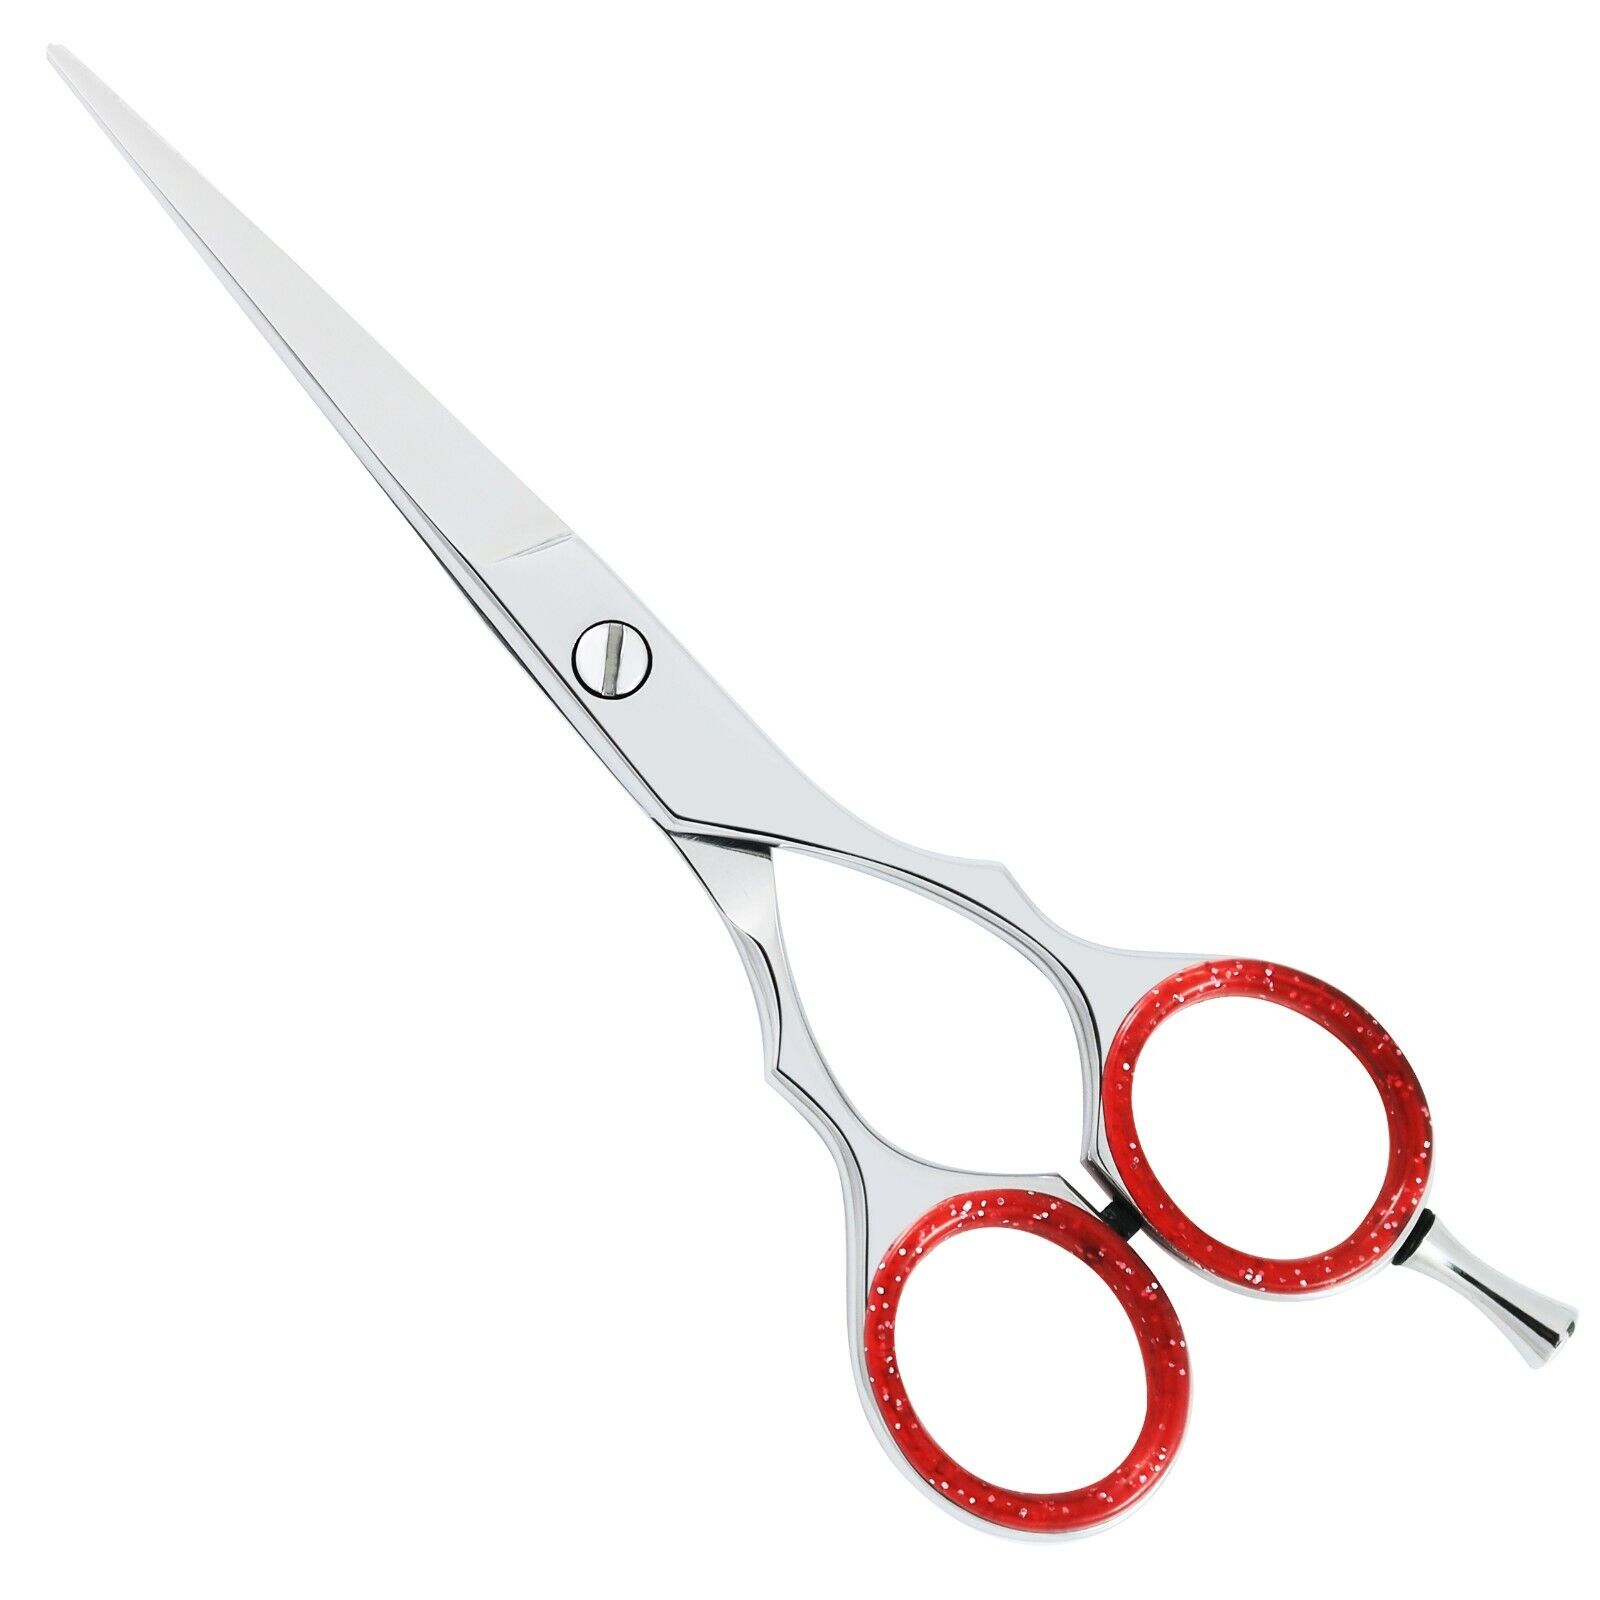 PROFESSIONAL BARBER HAIR CUTTING+THINNING SCISSORS BARBER SHEARS SET 6.5"  vertical int Does Not Apply - фотография #3